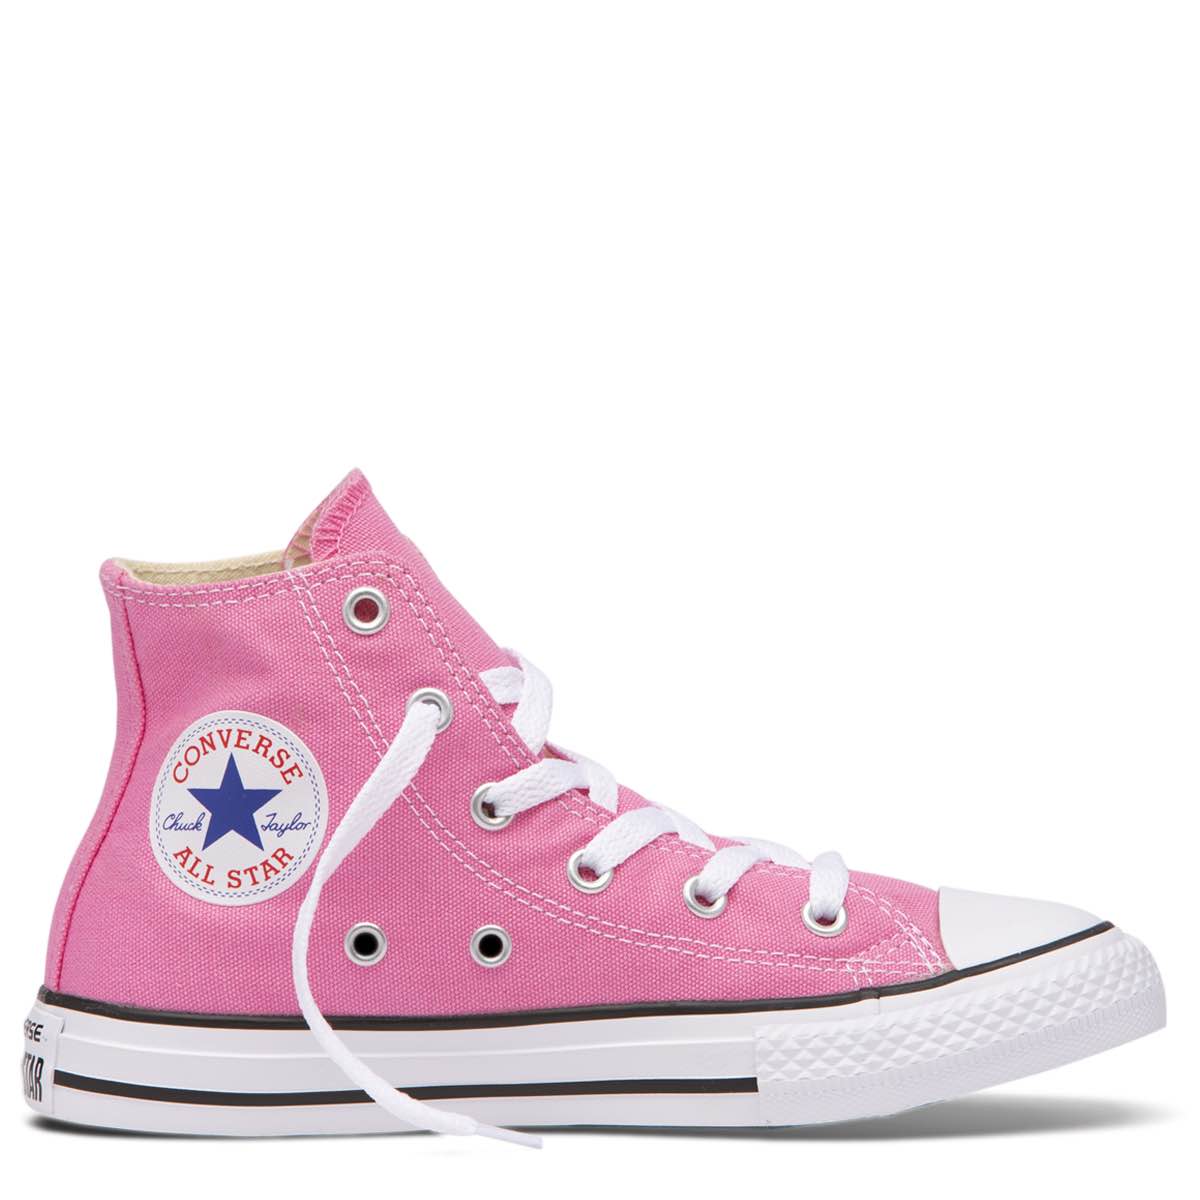 Spanning Locomotief Structureel Converse Kids Chuck Taylor All Star Junior High Top Pink | Afterpay – Tiny  Style